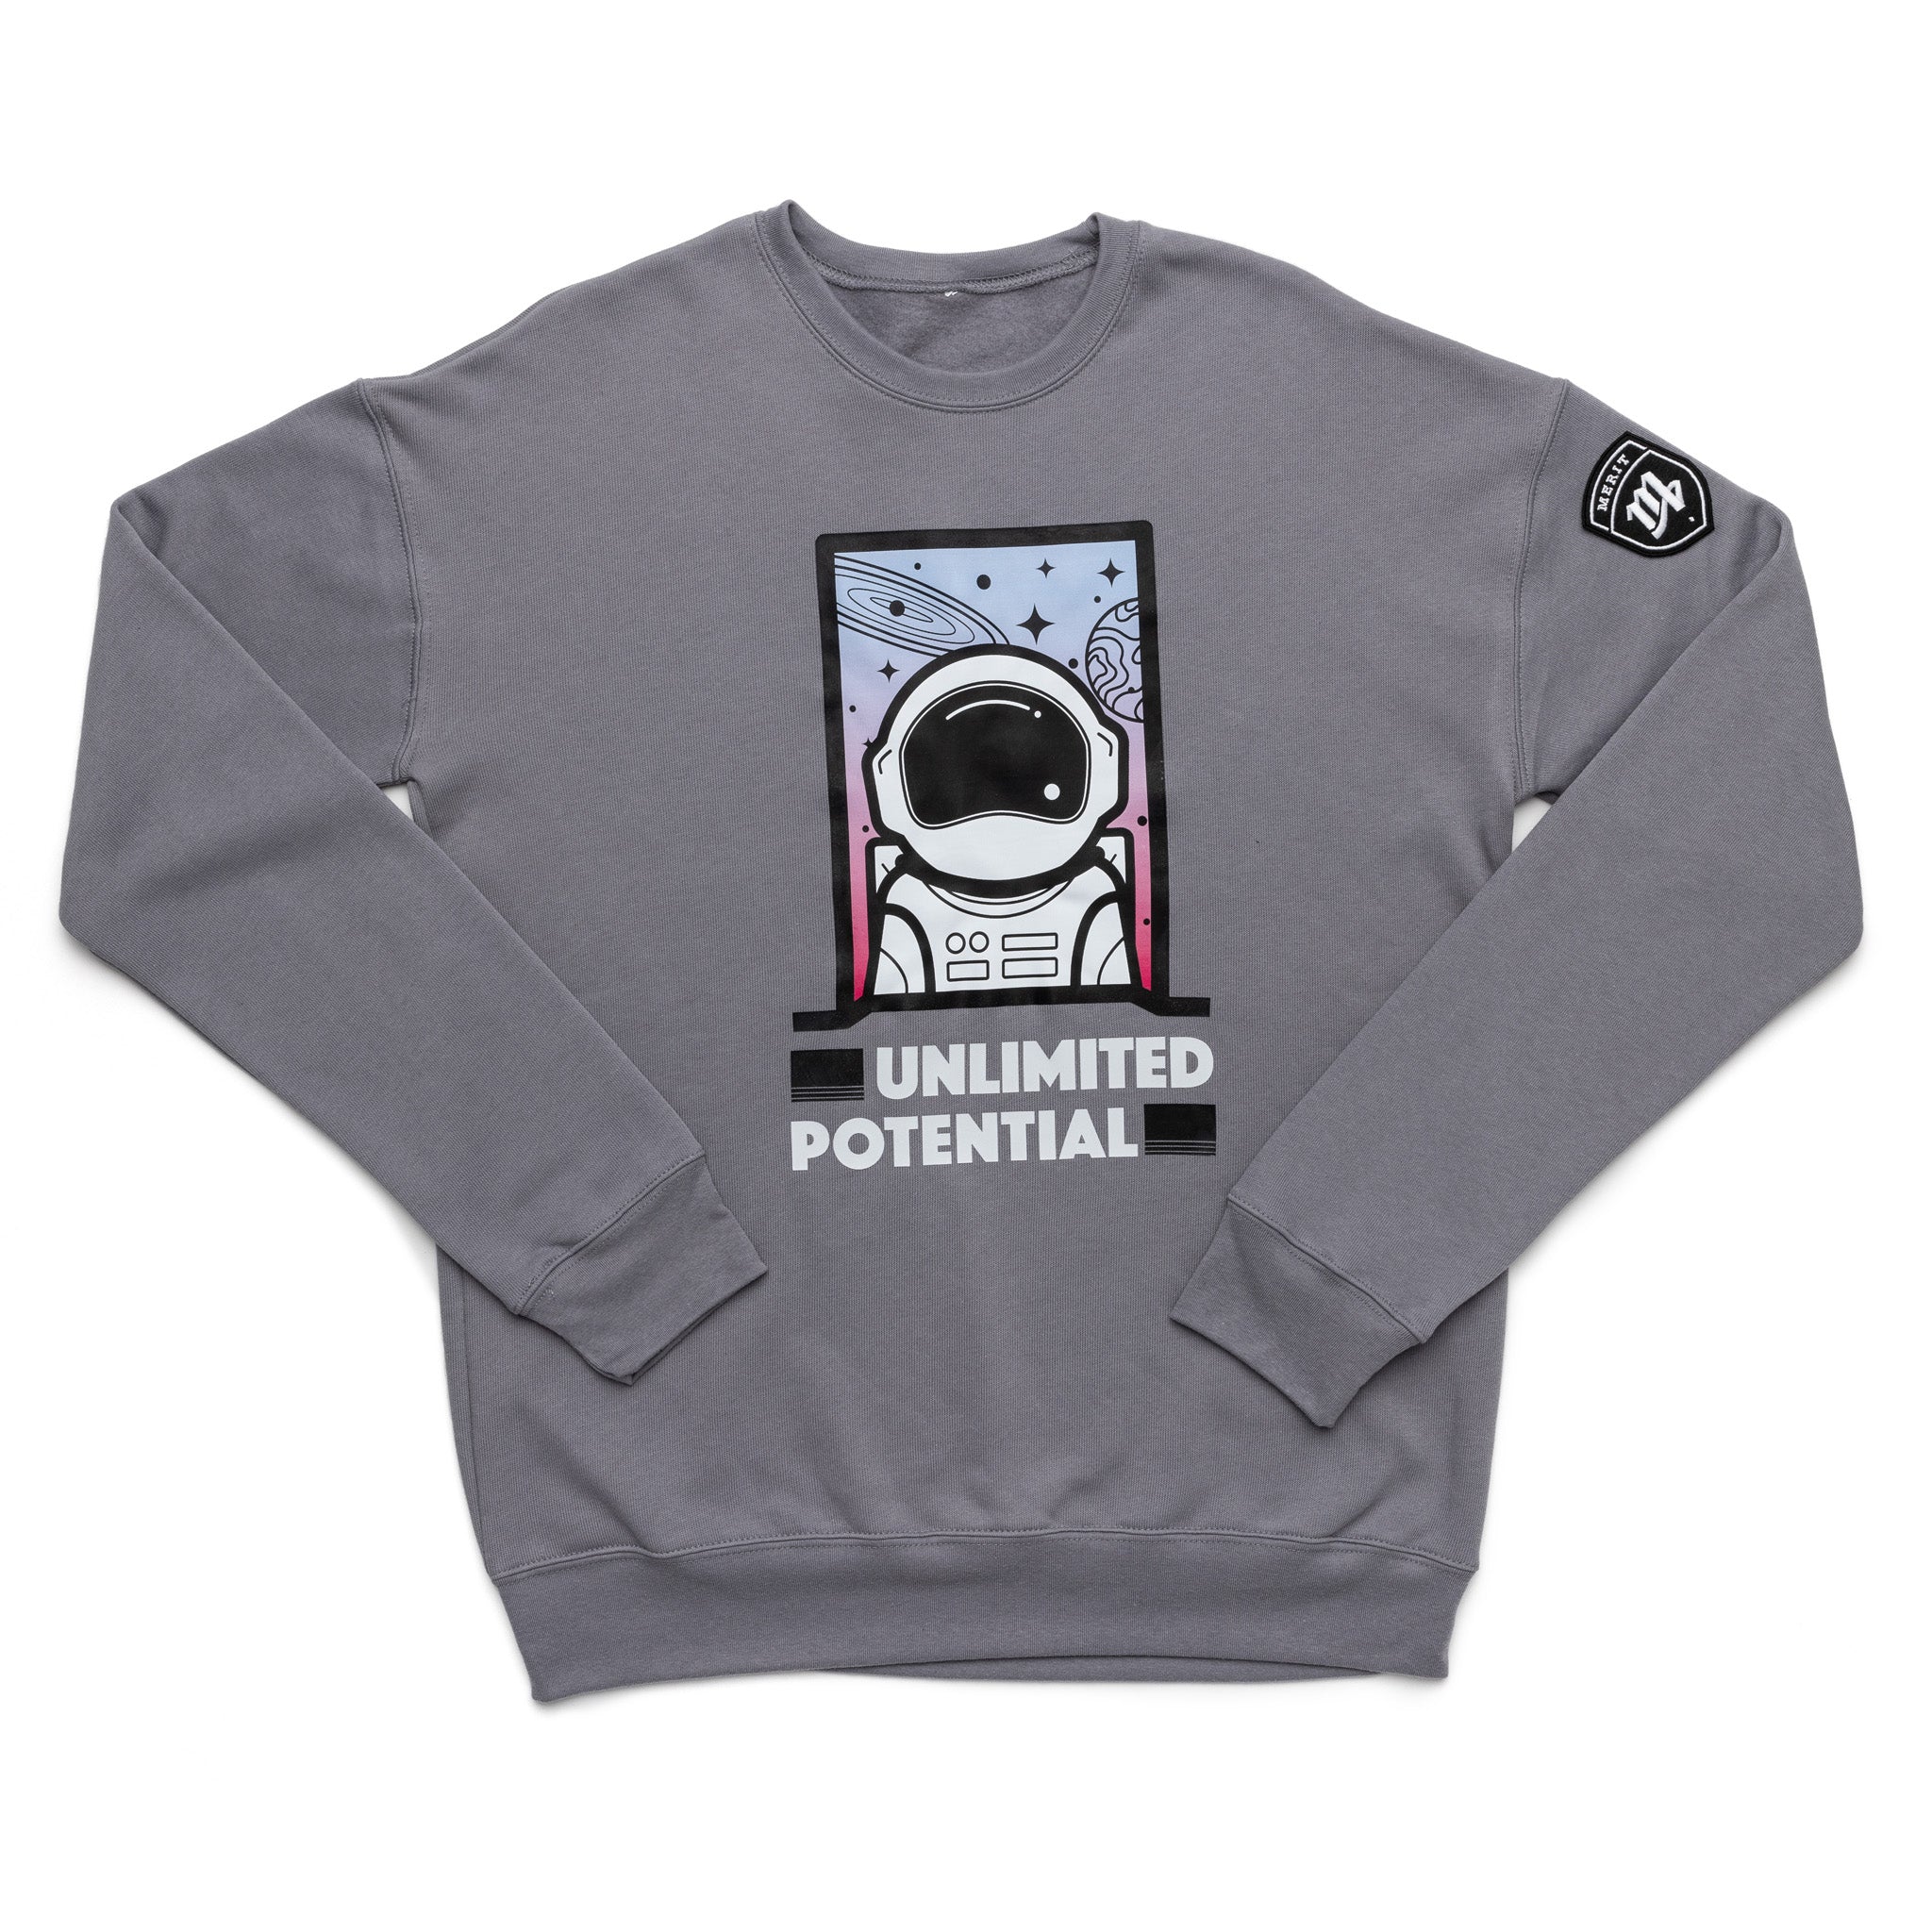 Reach for the Stars Sweater - Gray